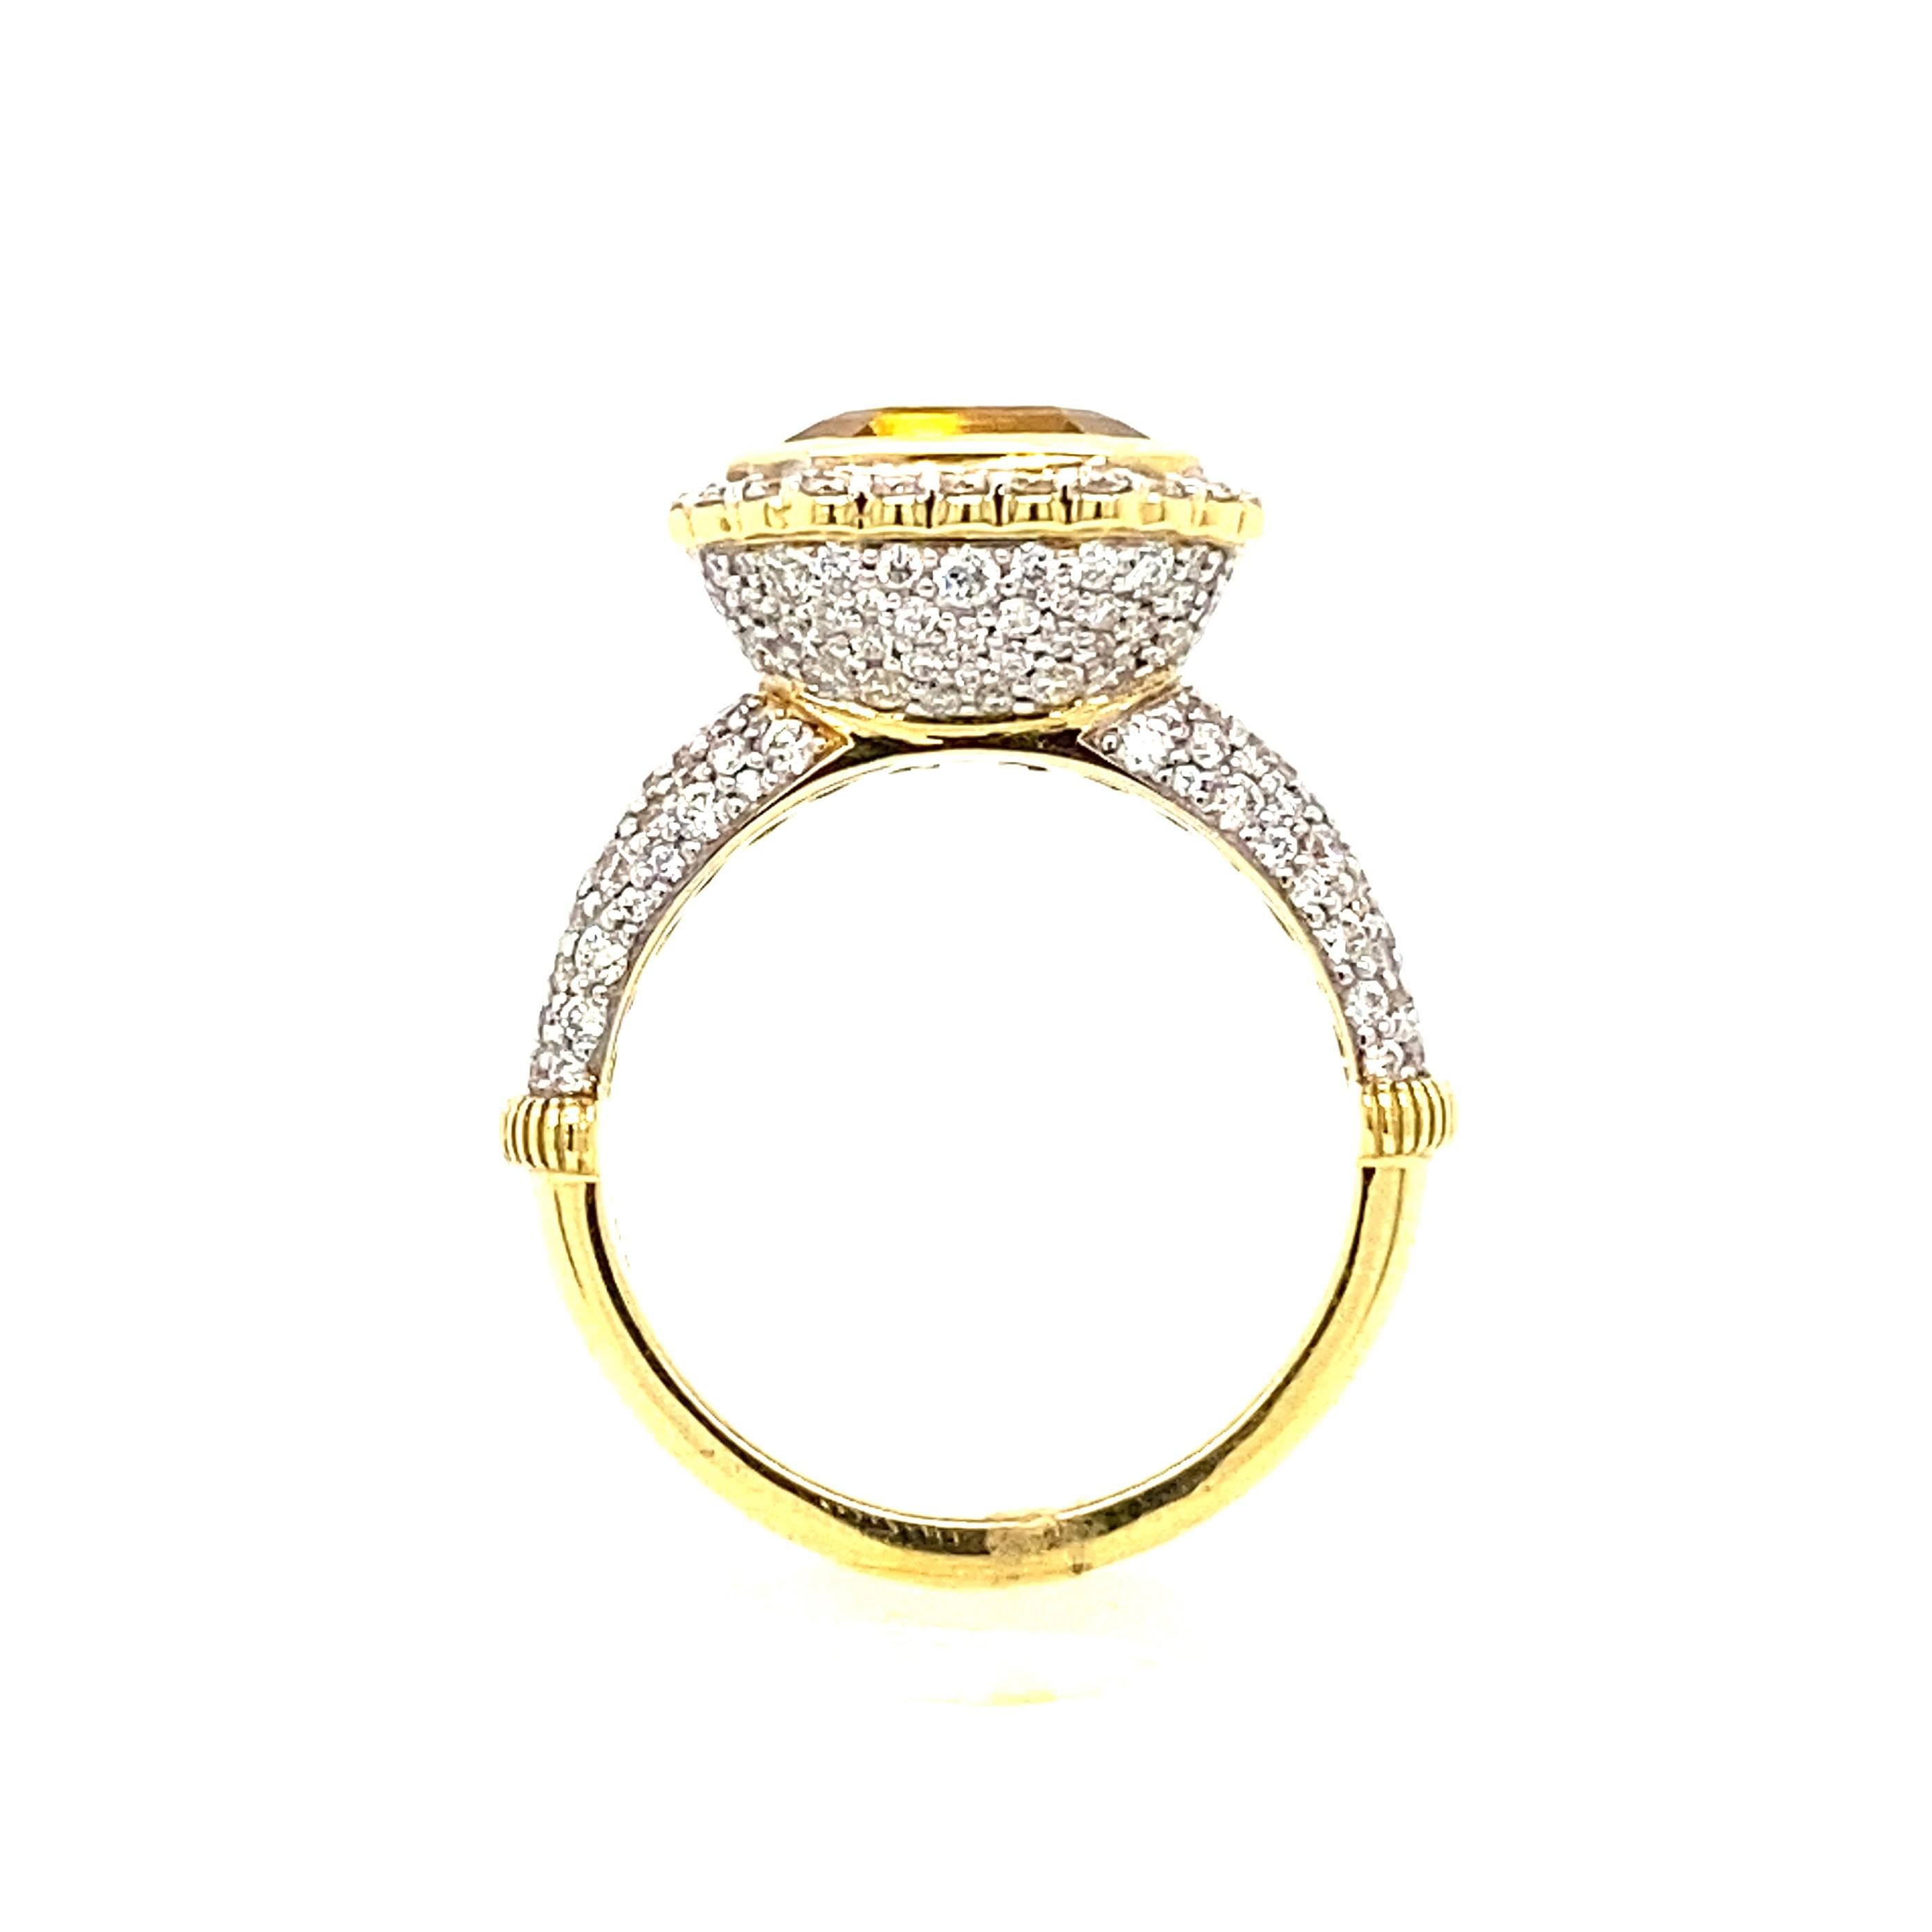 Sloane Street one-of-a-kind yellow beryl cocktail ring in 18k yellow gold features a vibrant bezel set asscher cut yellow beryl set off by a white diamond halo and stunning pave white diamonds that wrap the entire shank and gallery. Size 7